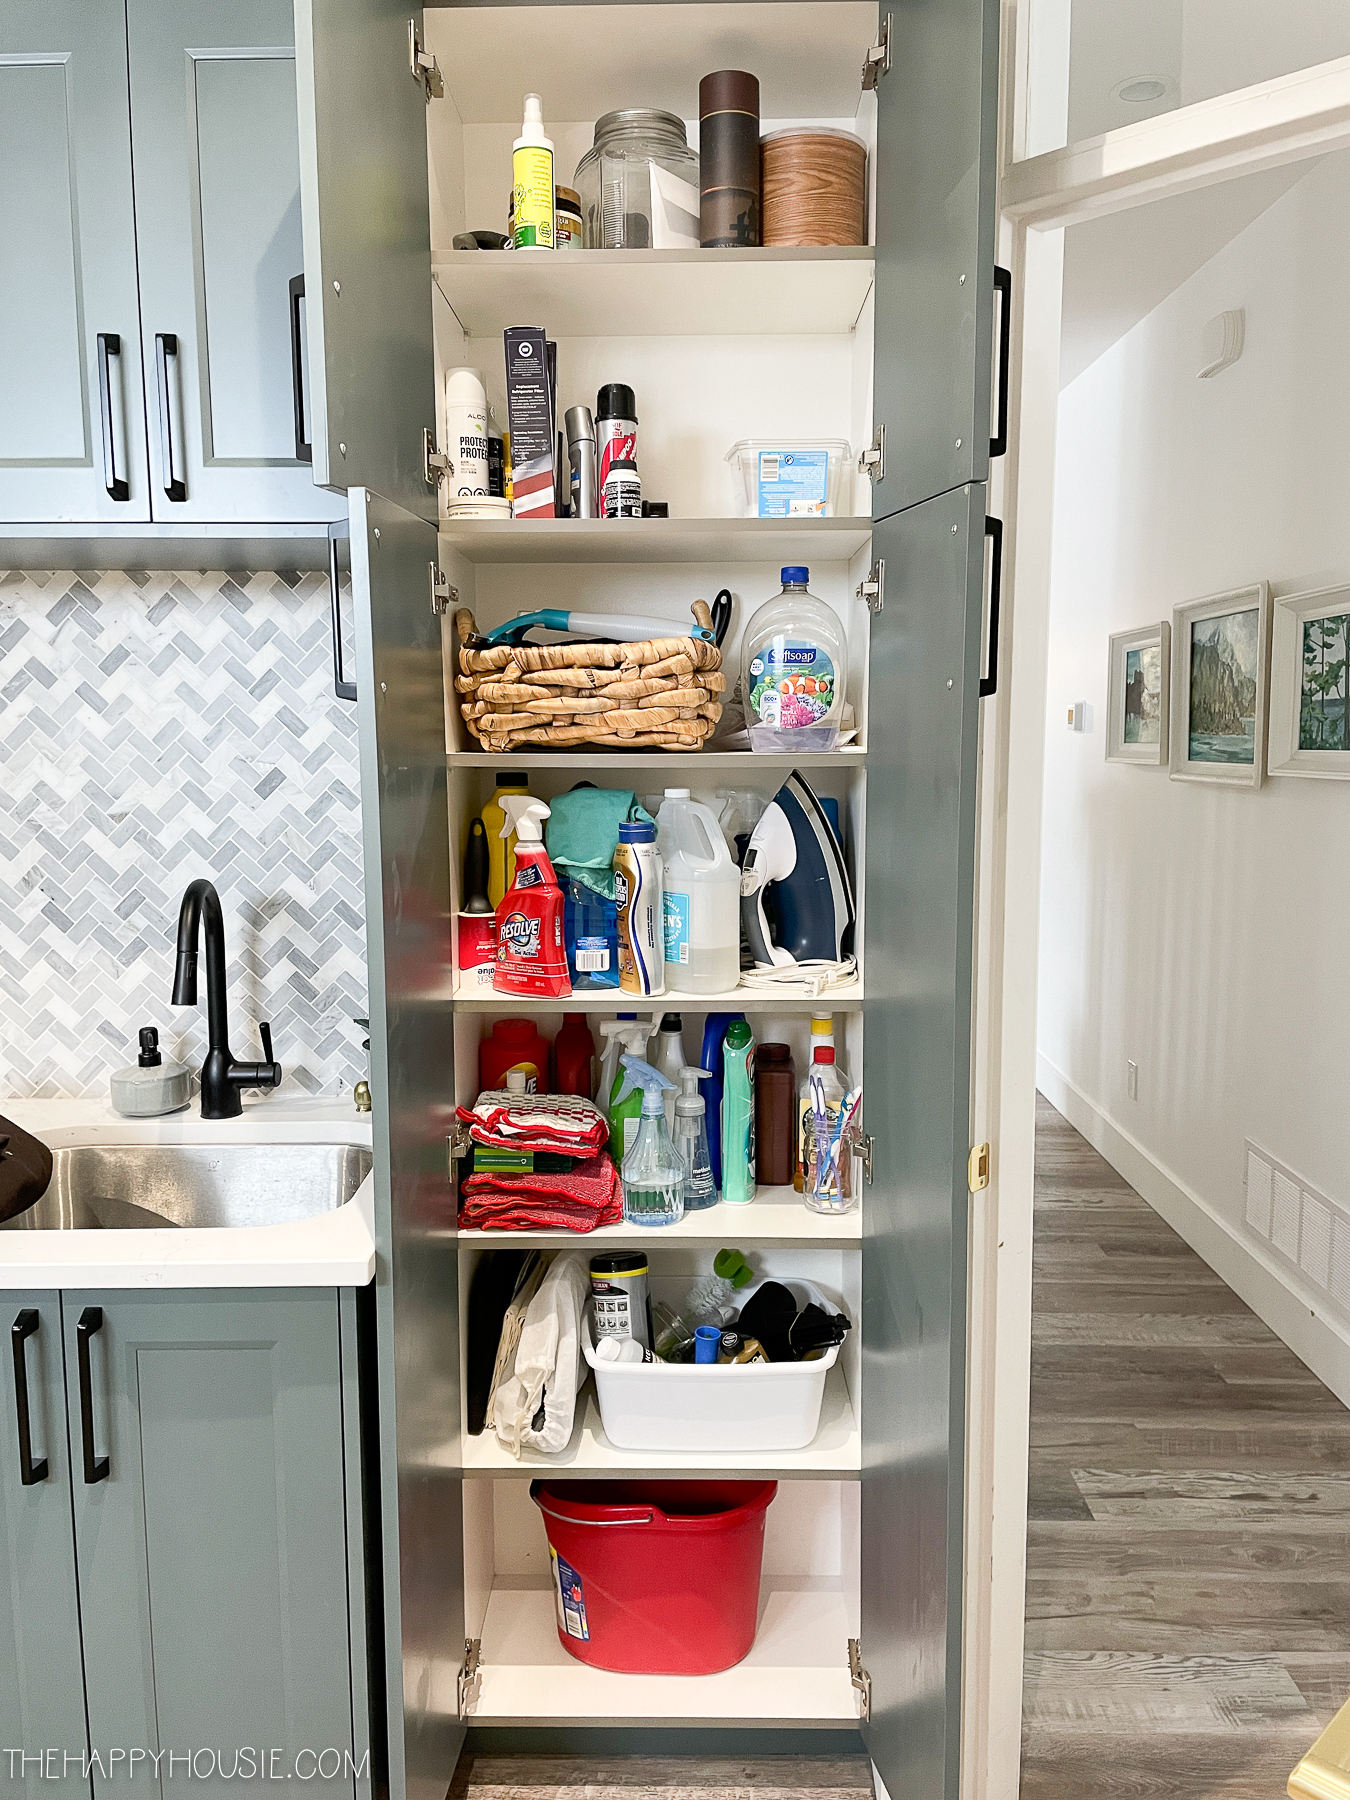 https://www.thehappyhousie.com/wp-content/uploads/2022/01/how-to-organize-your-laundry-room-and-mudroom-3.jpg